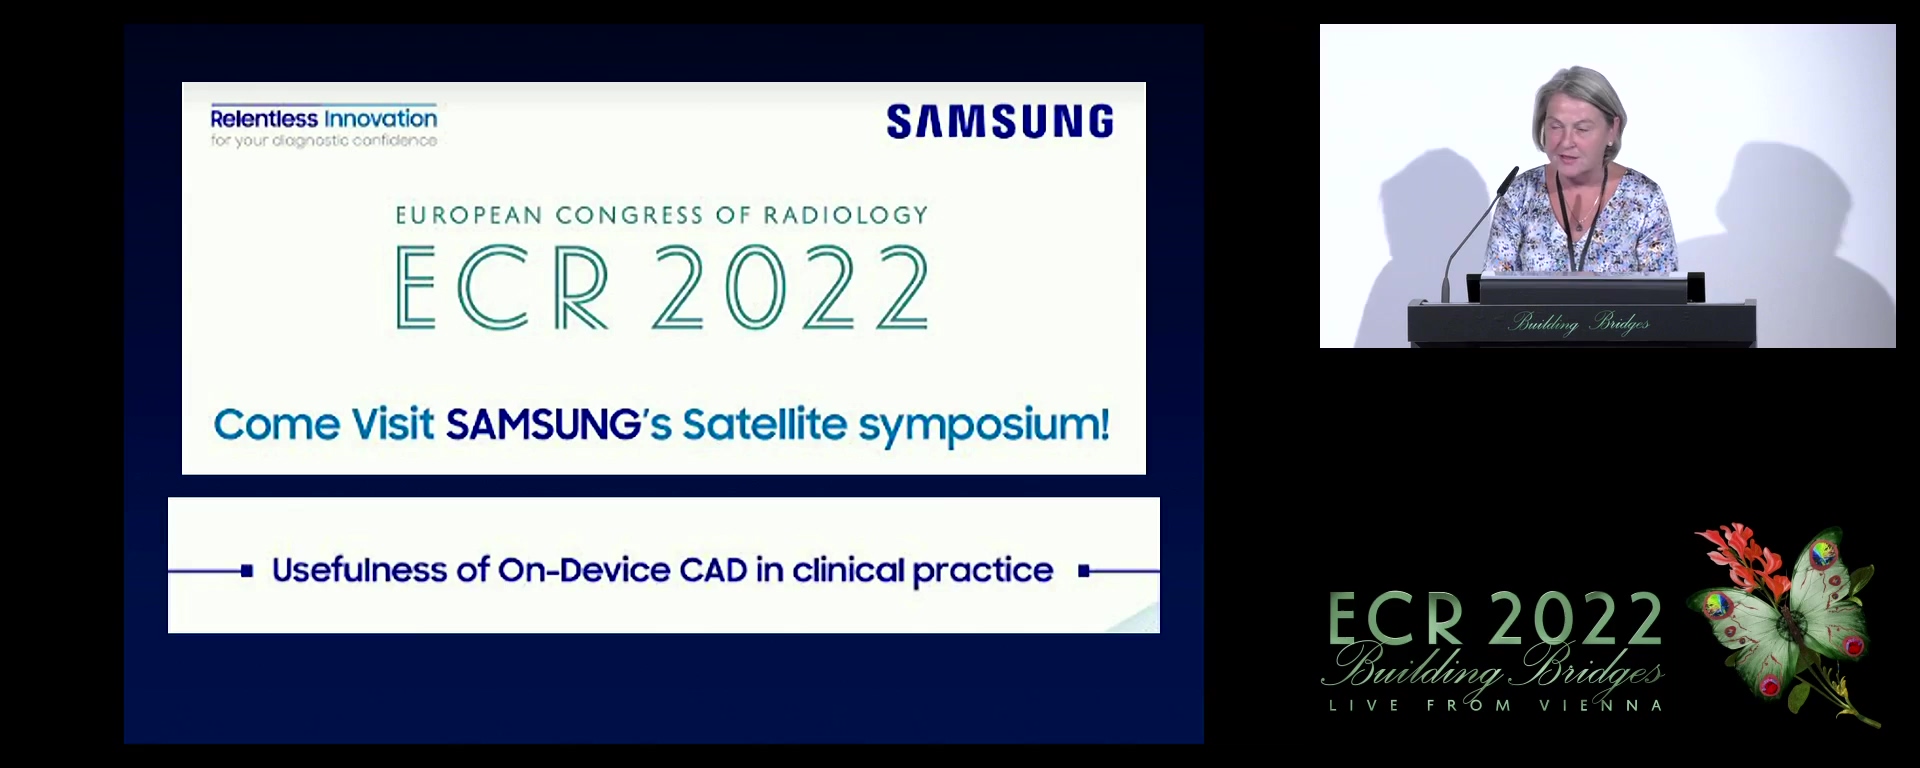 Usefulness of On-Device CAD in clinical practice